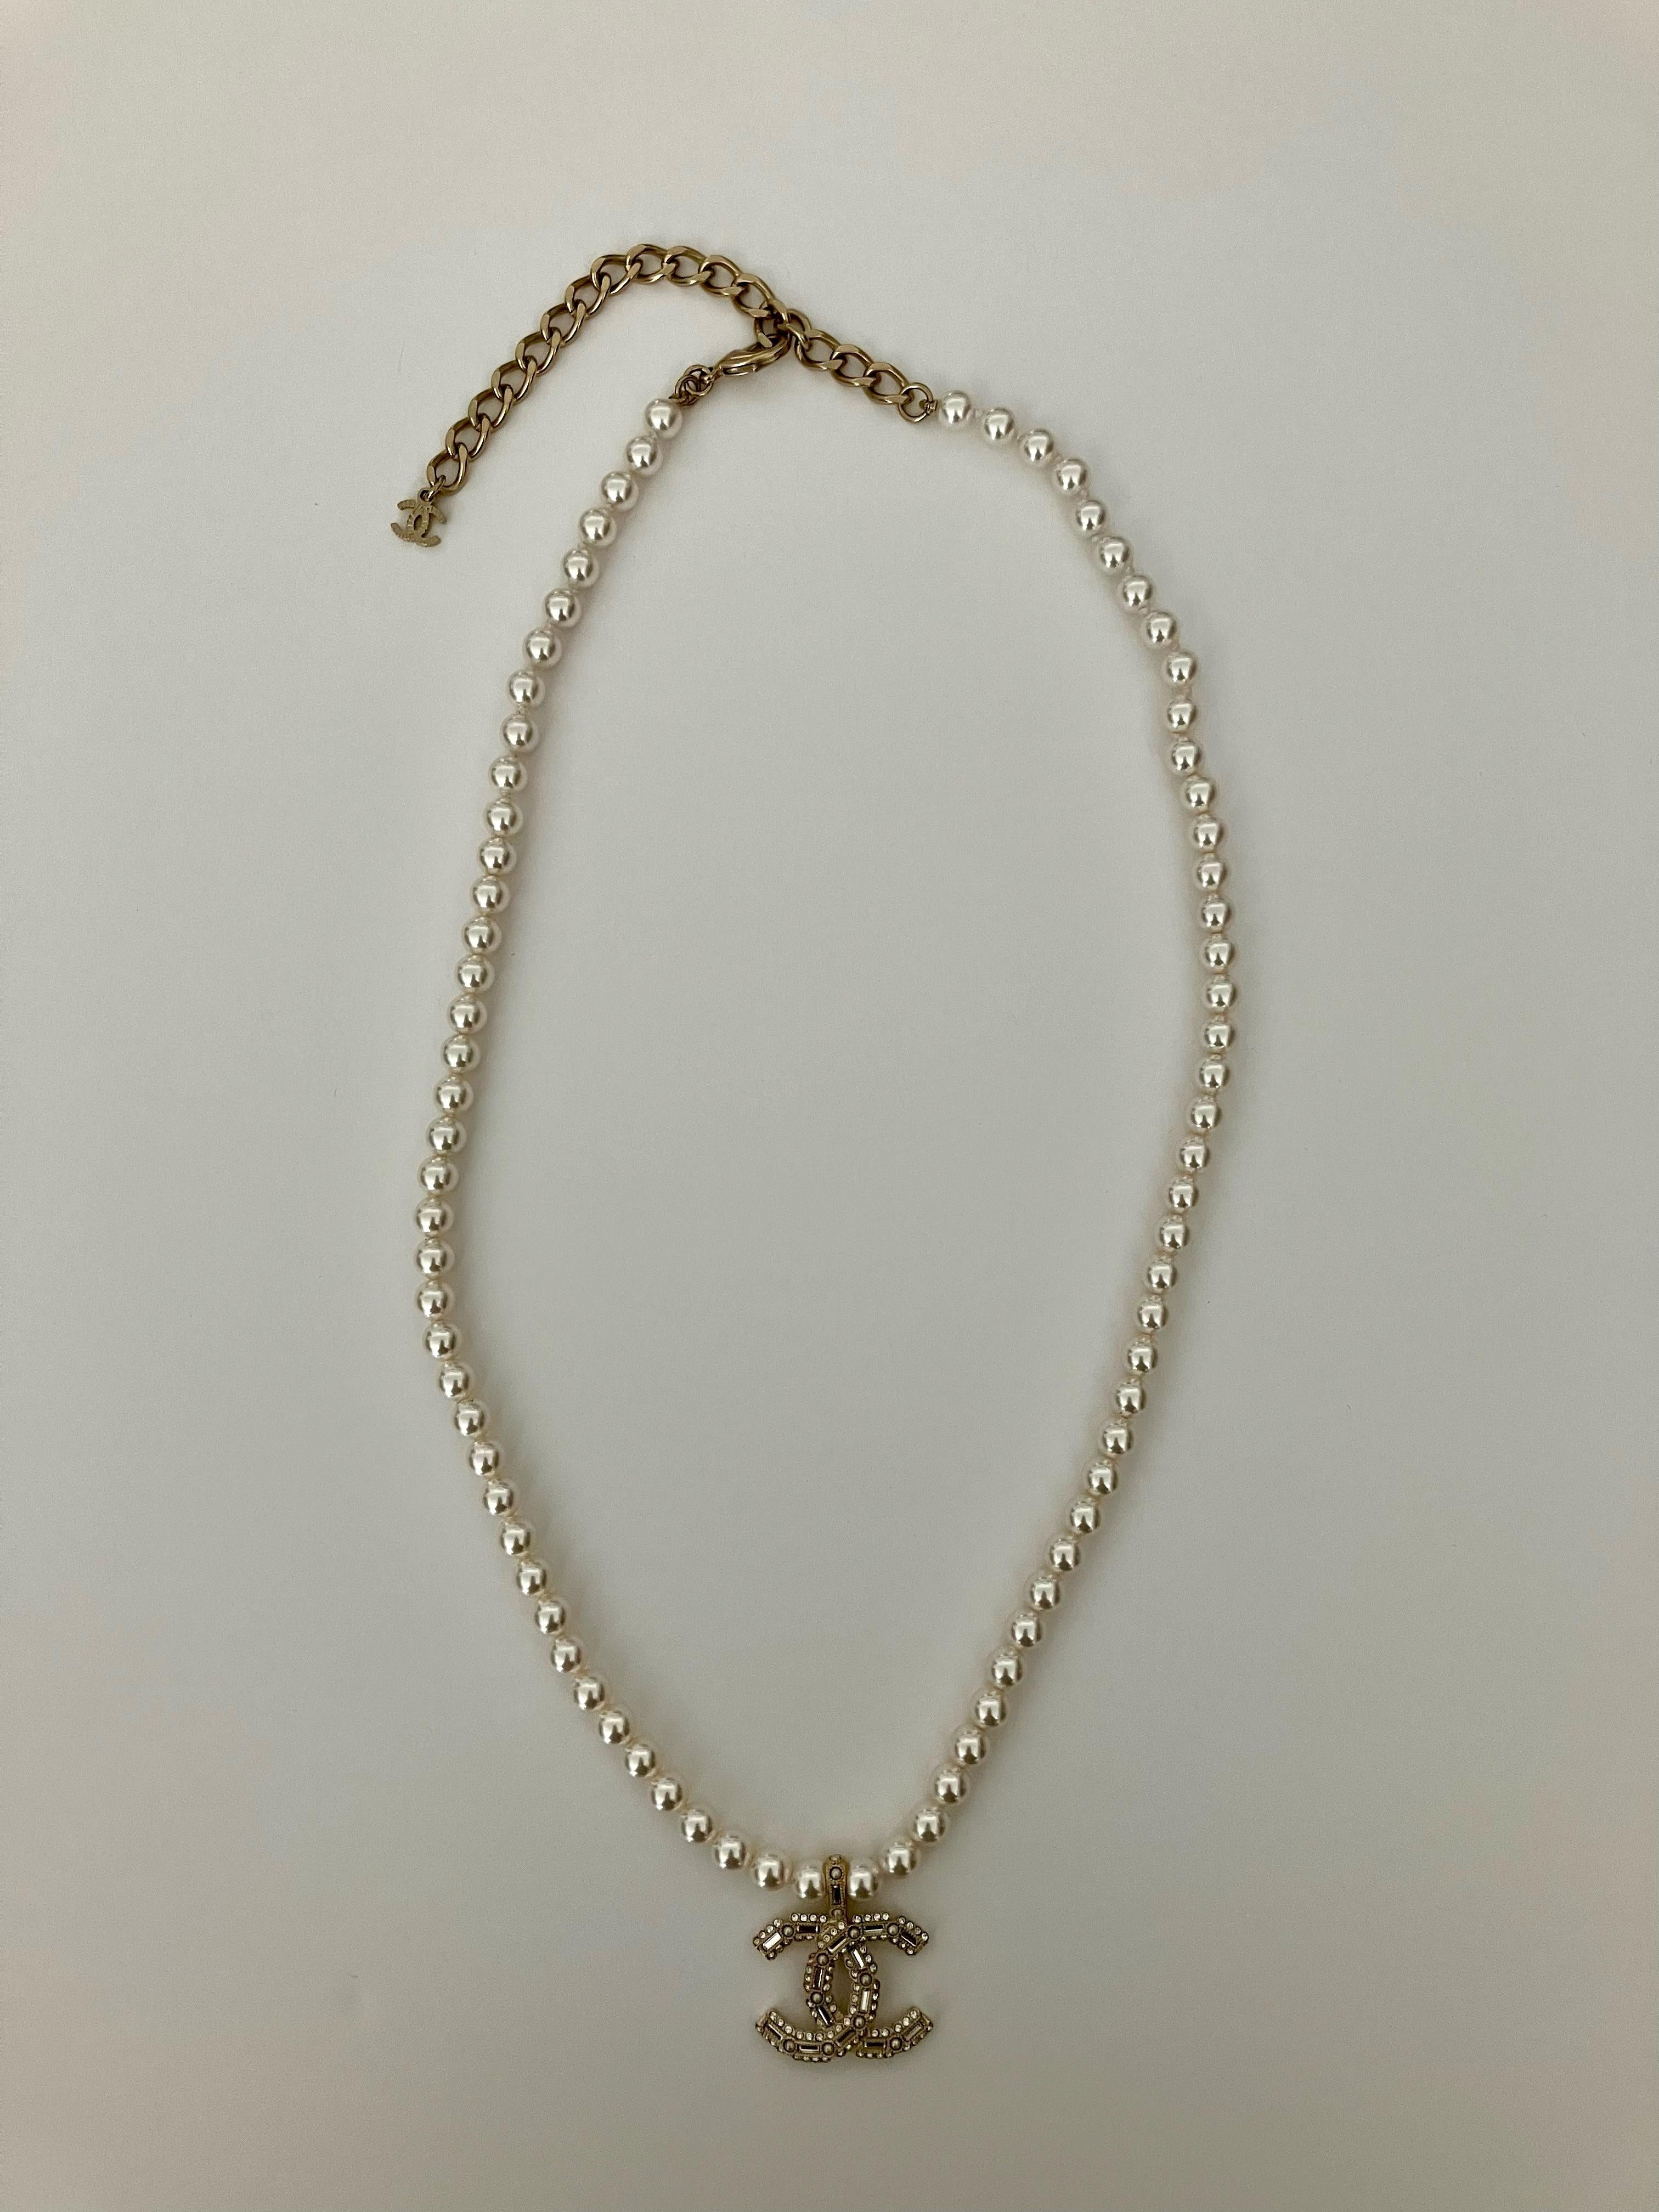 Chanel gold-tone and faux-pearls necklace featuring spring-ring fastening with Chanel pitted on, a front logo with strass and beads, faux-pearls beads. 
Maxi Length: 
Front Chanel medal: 1in (2.5cm) X 1in (2.5cm)
Circa: 2000s
In excellent vintage